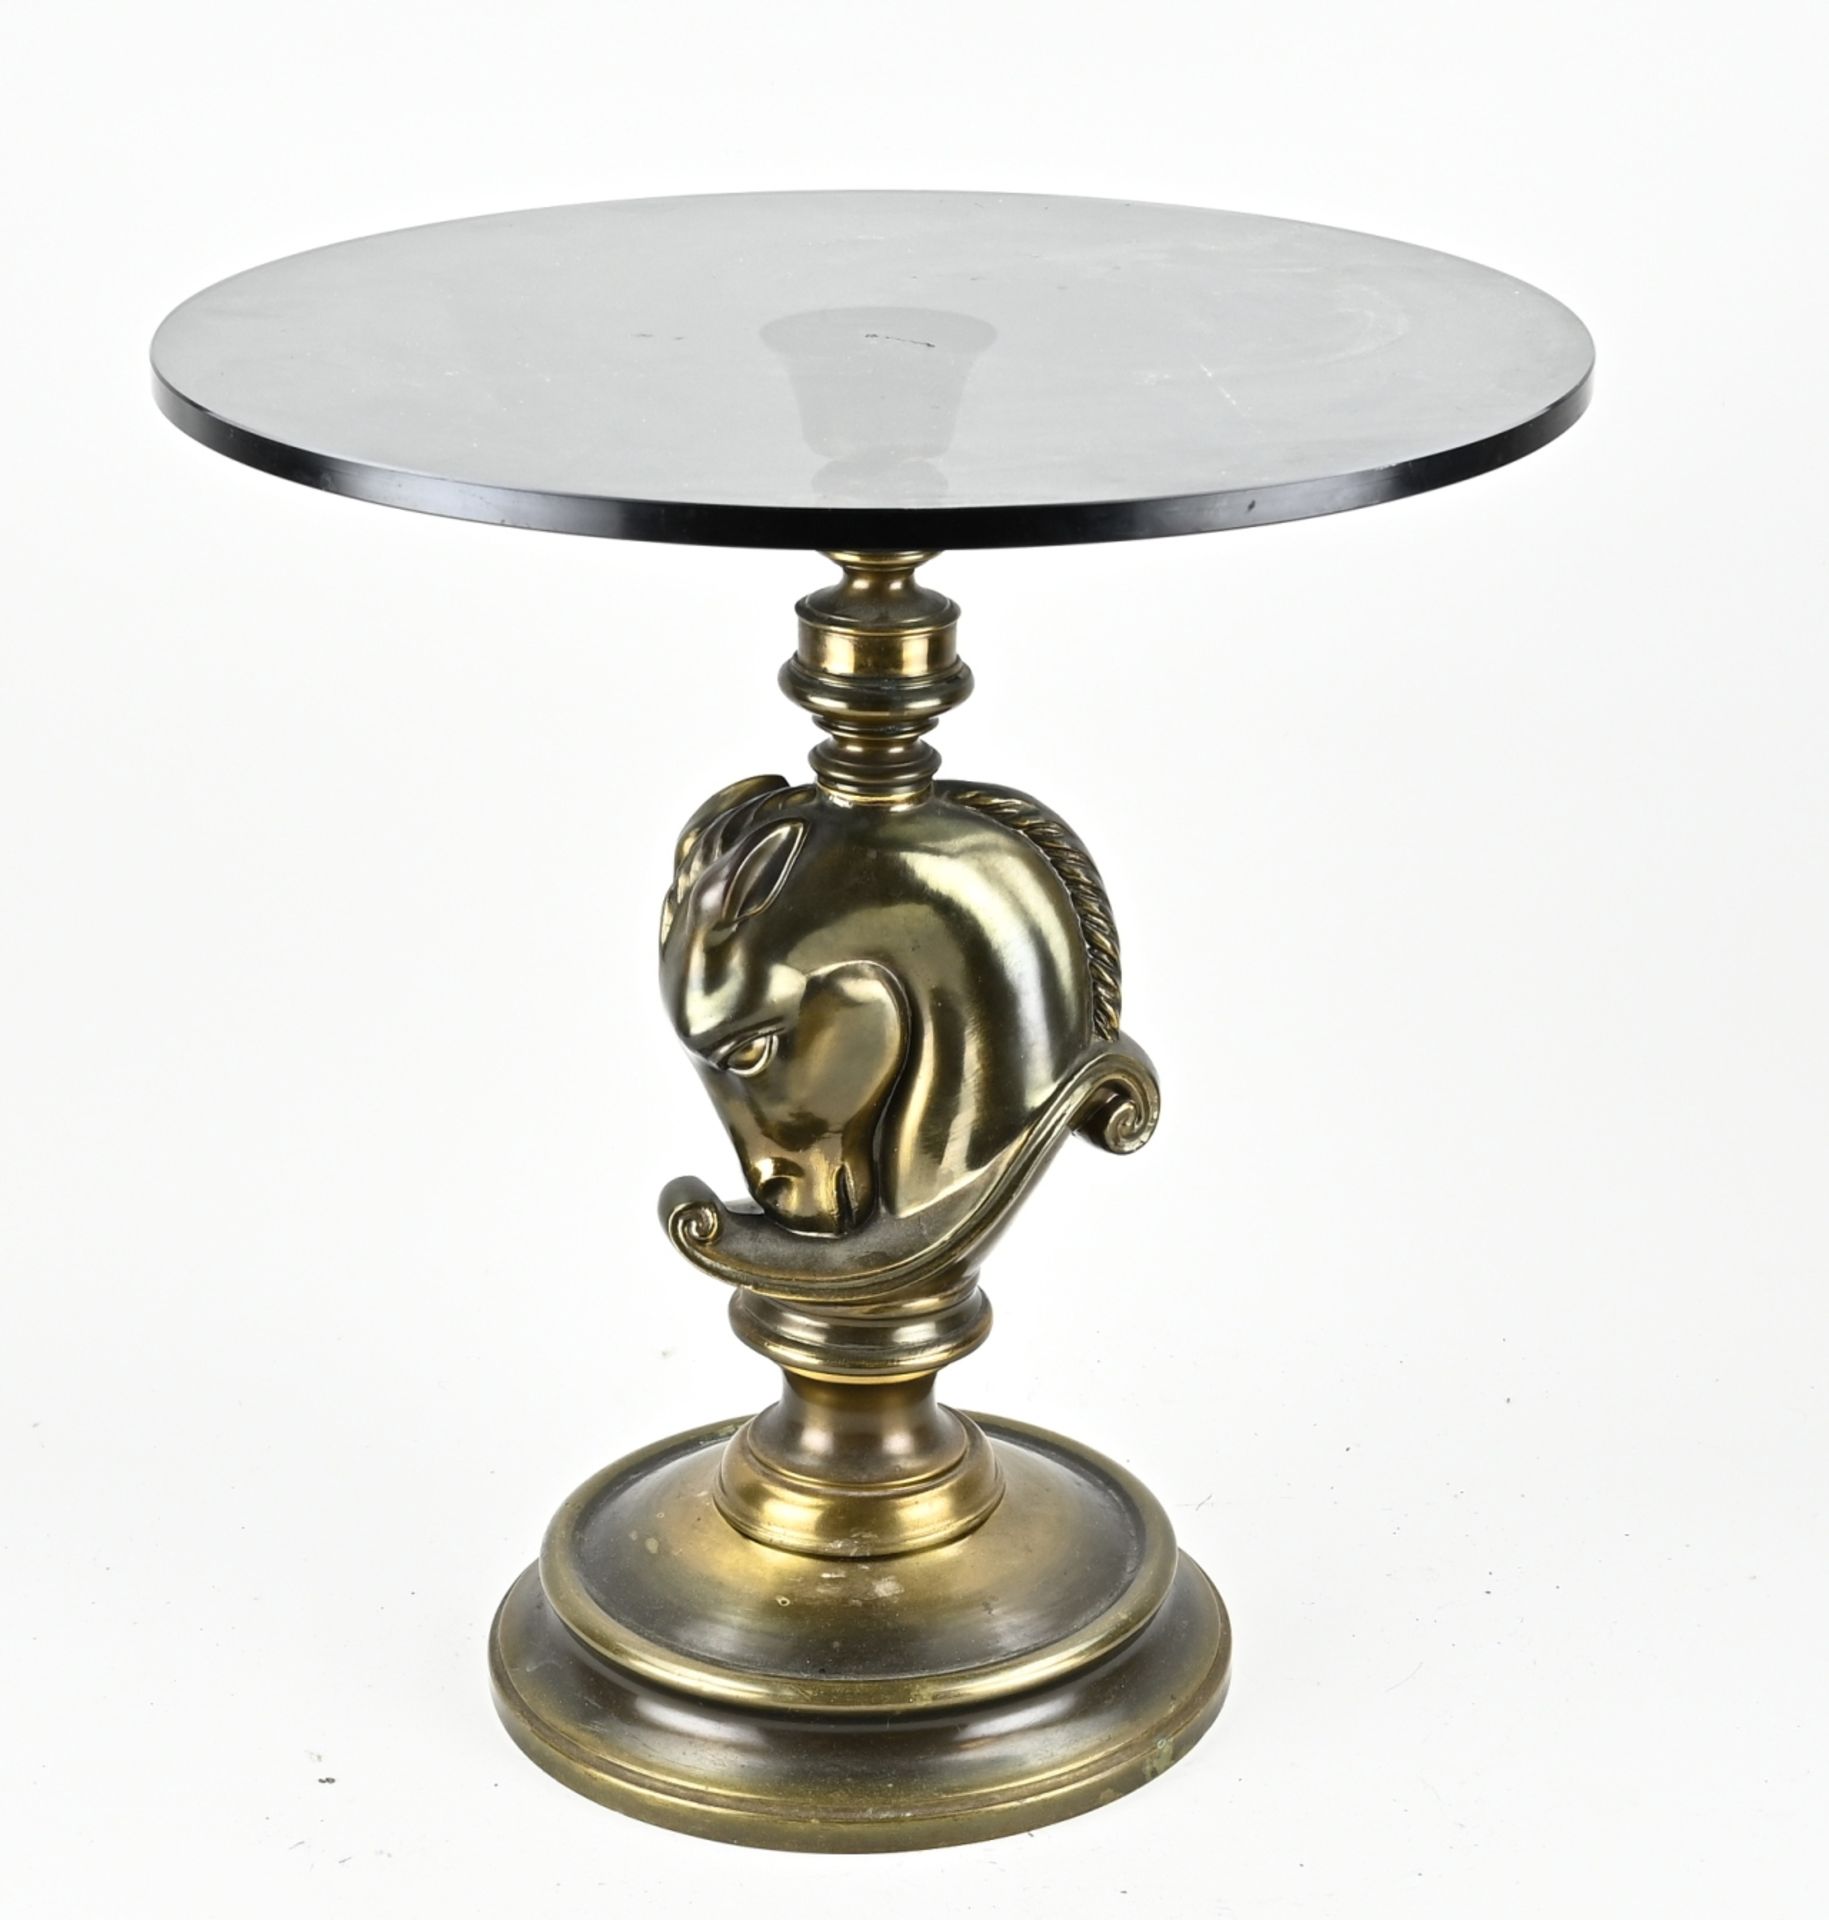 Vintage Maison Charles horse table